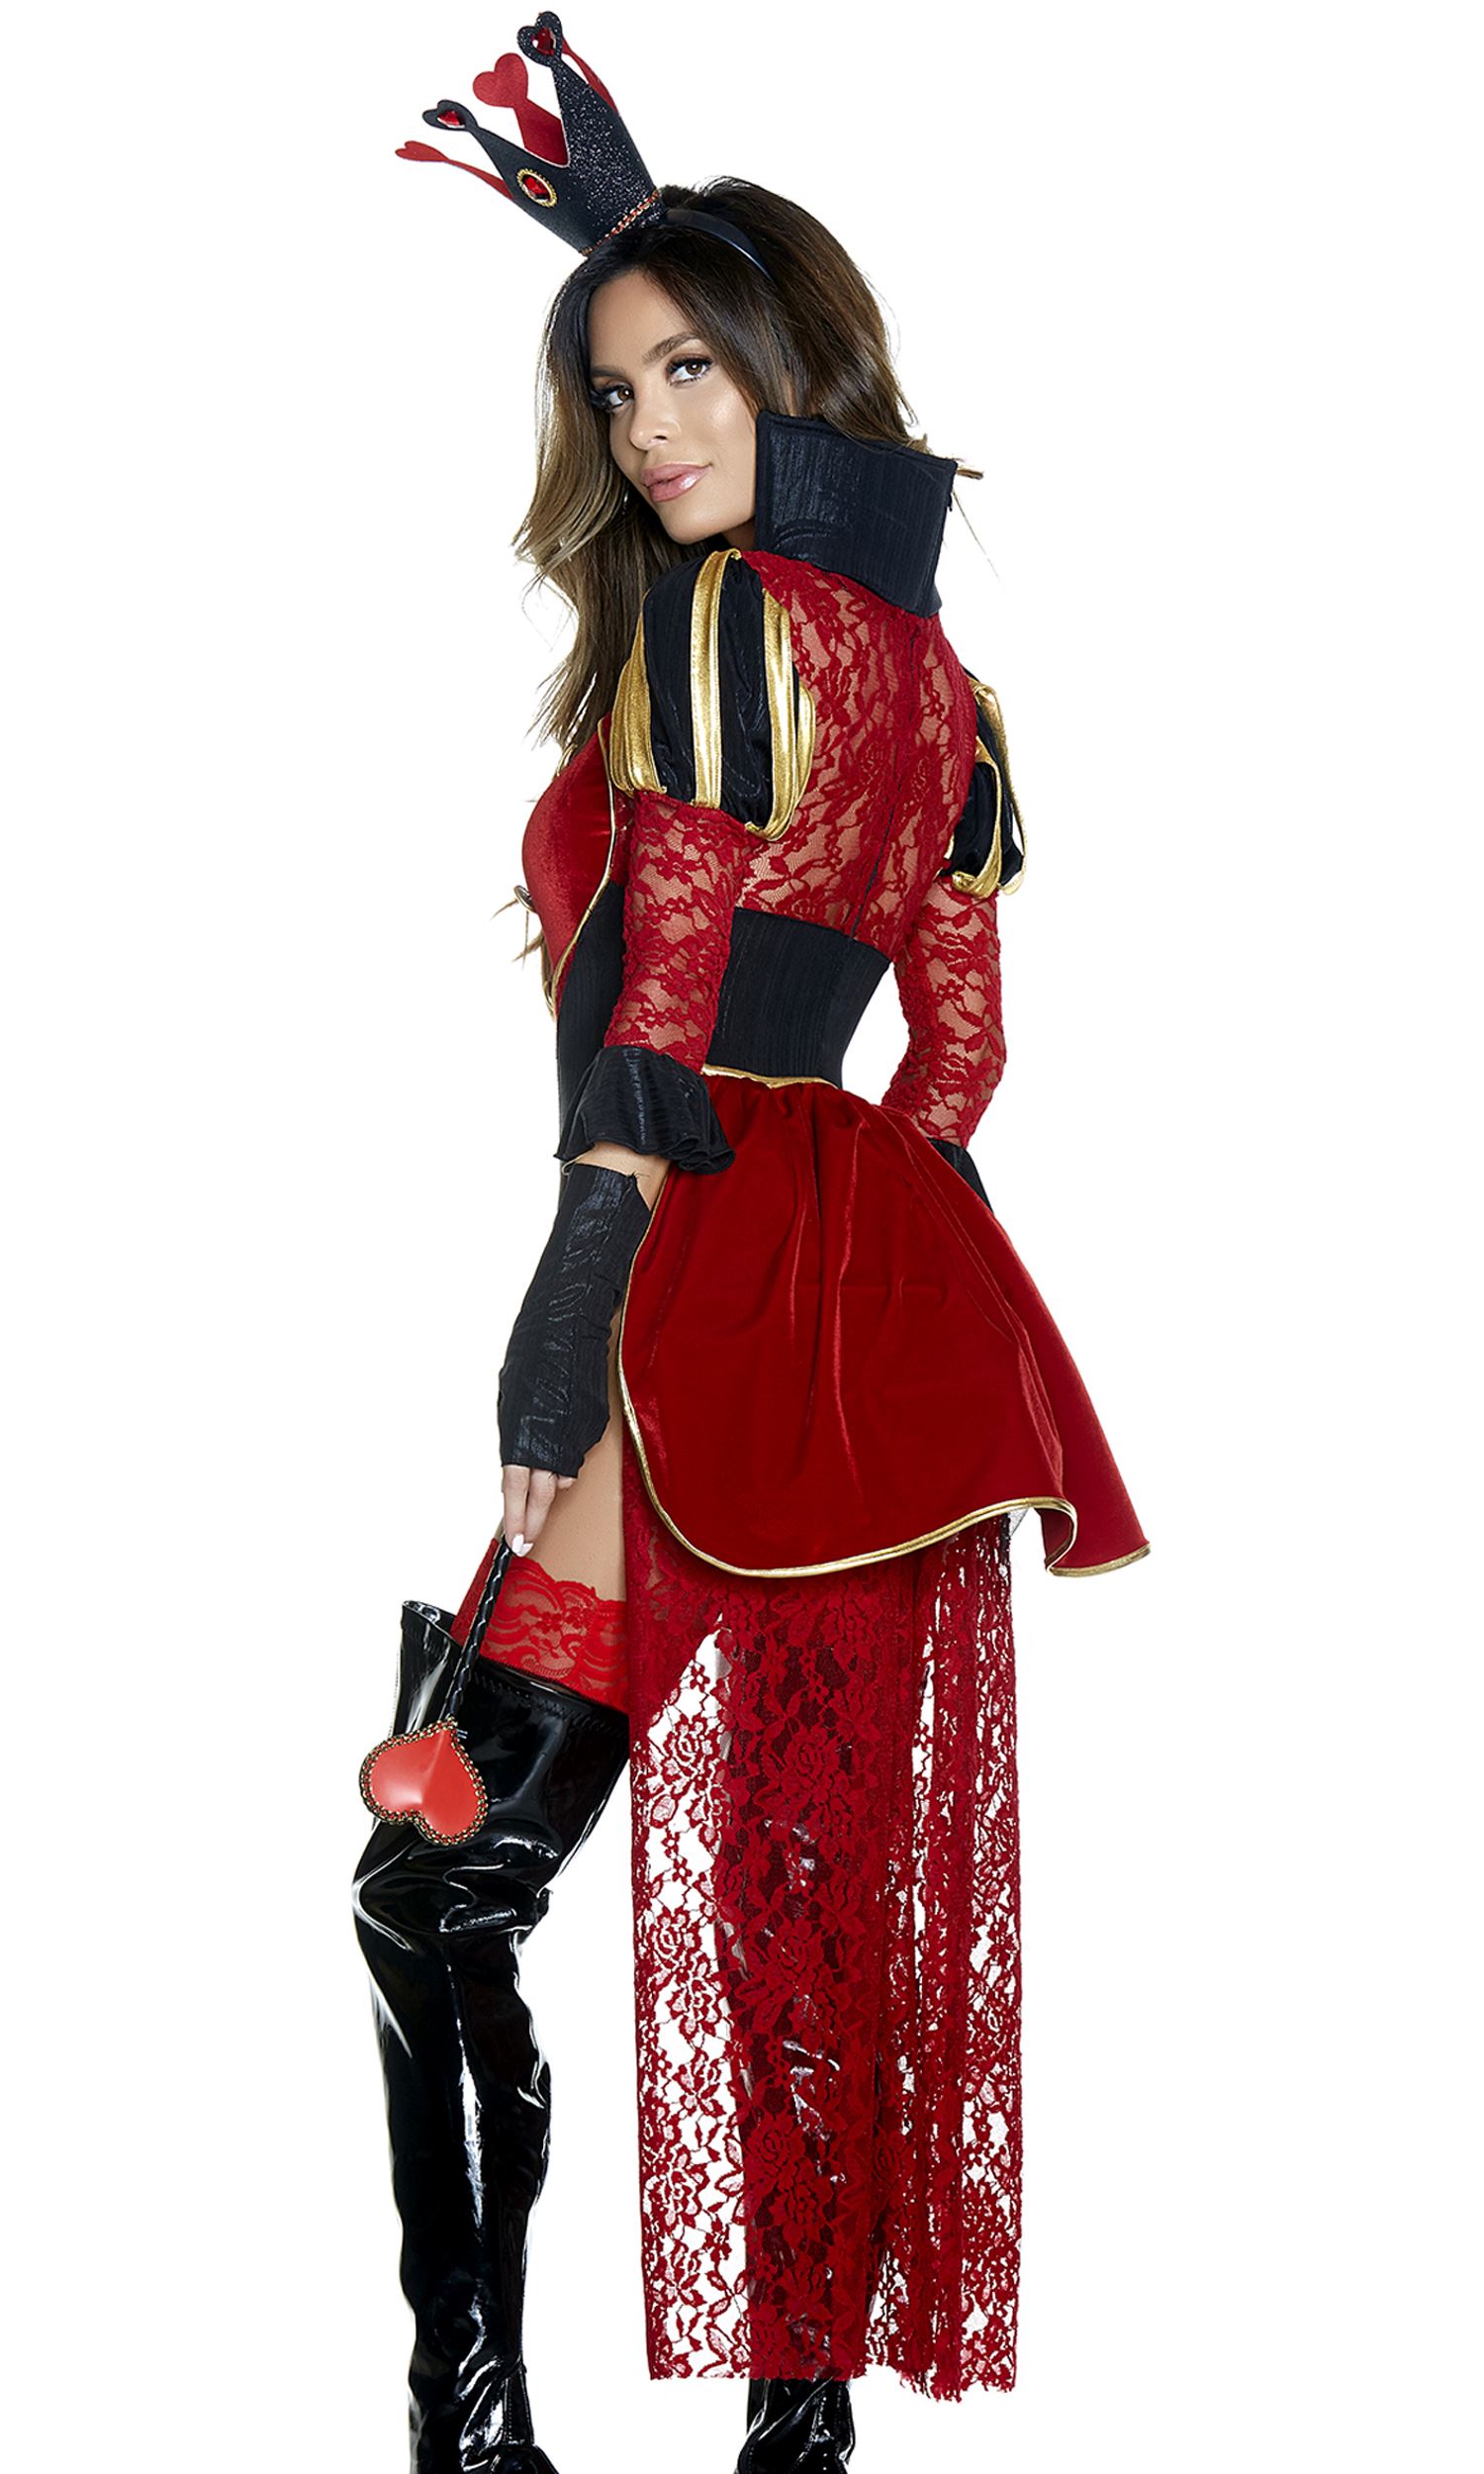 Adult Royal Queen Women Costume 97 99 The Costume Land